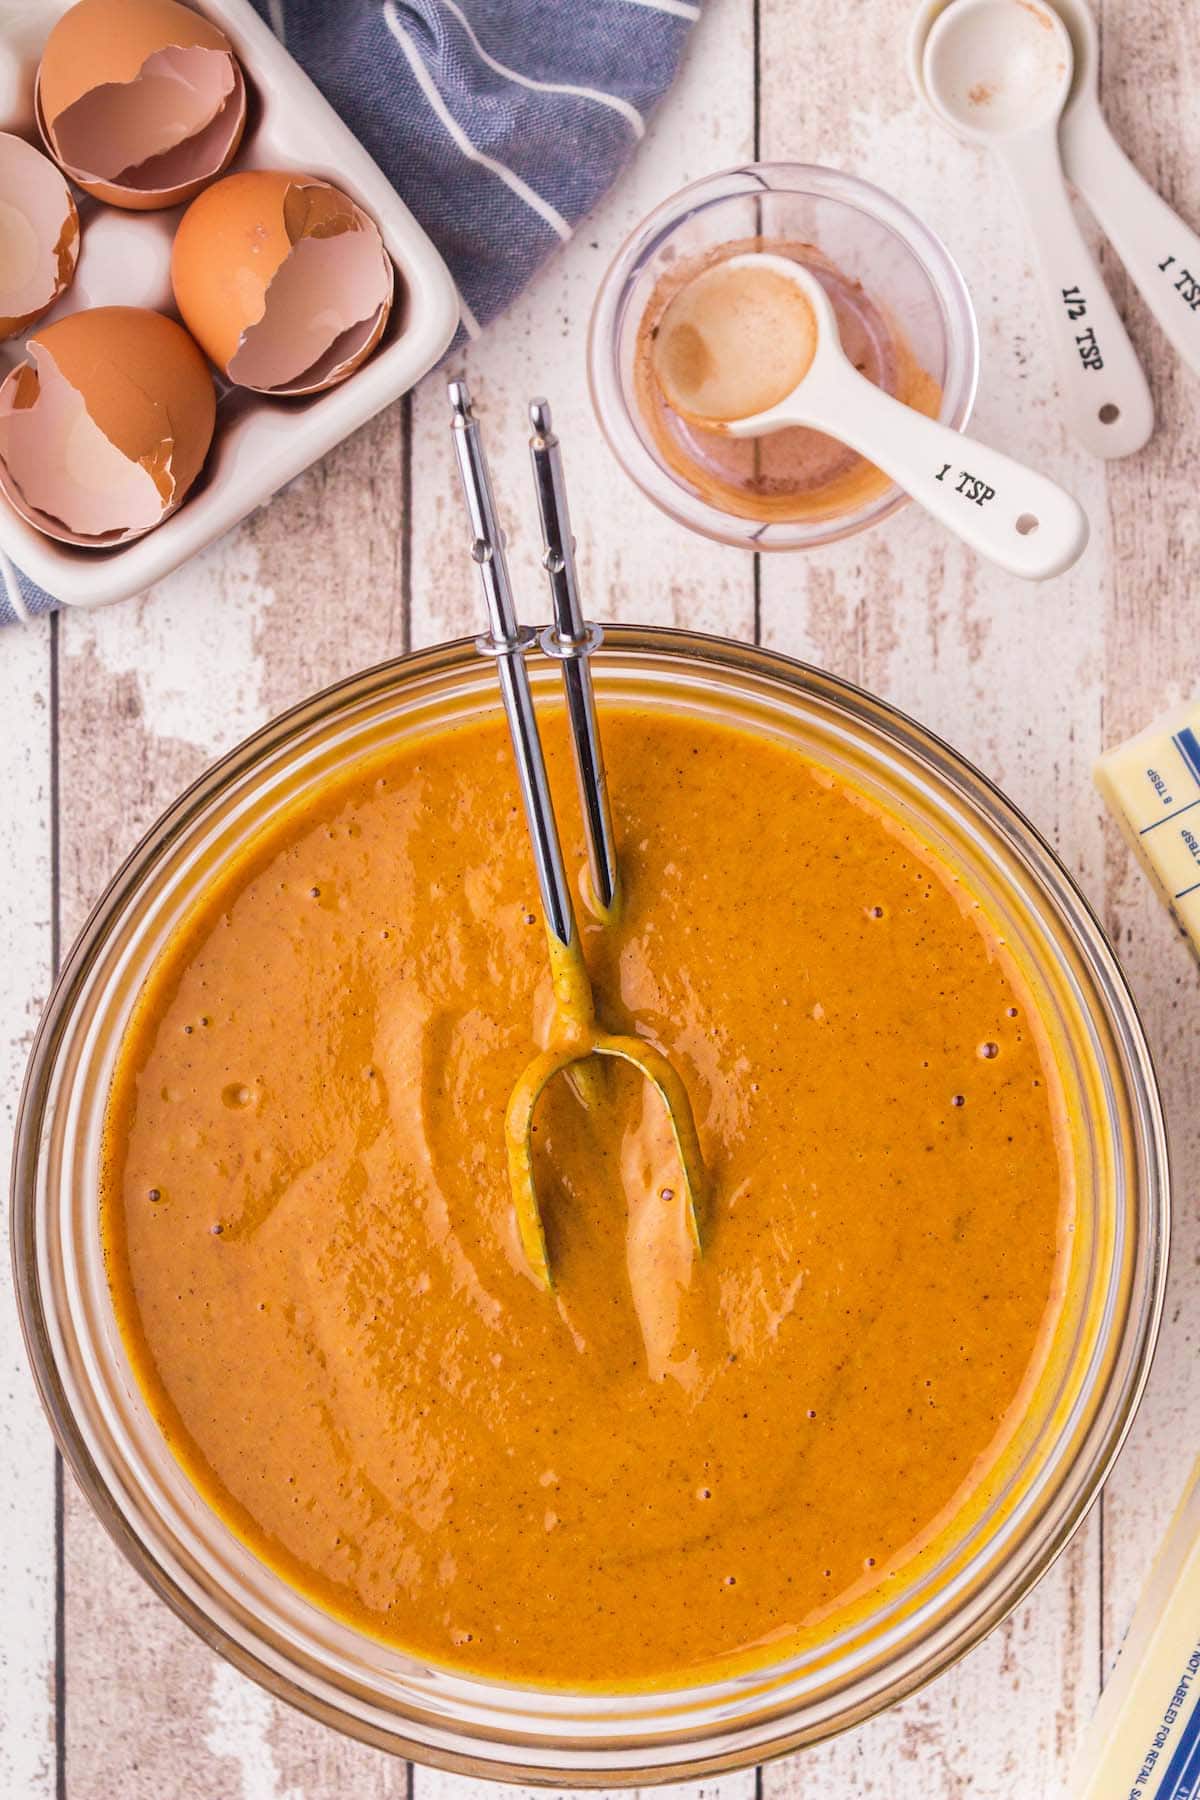 Combine pumpkin, evaporated milk, sugar, eggs, cinnamon, ginger, and nutmeg in a bowl and mix until smooth